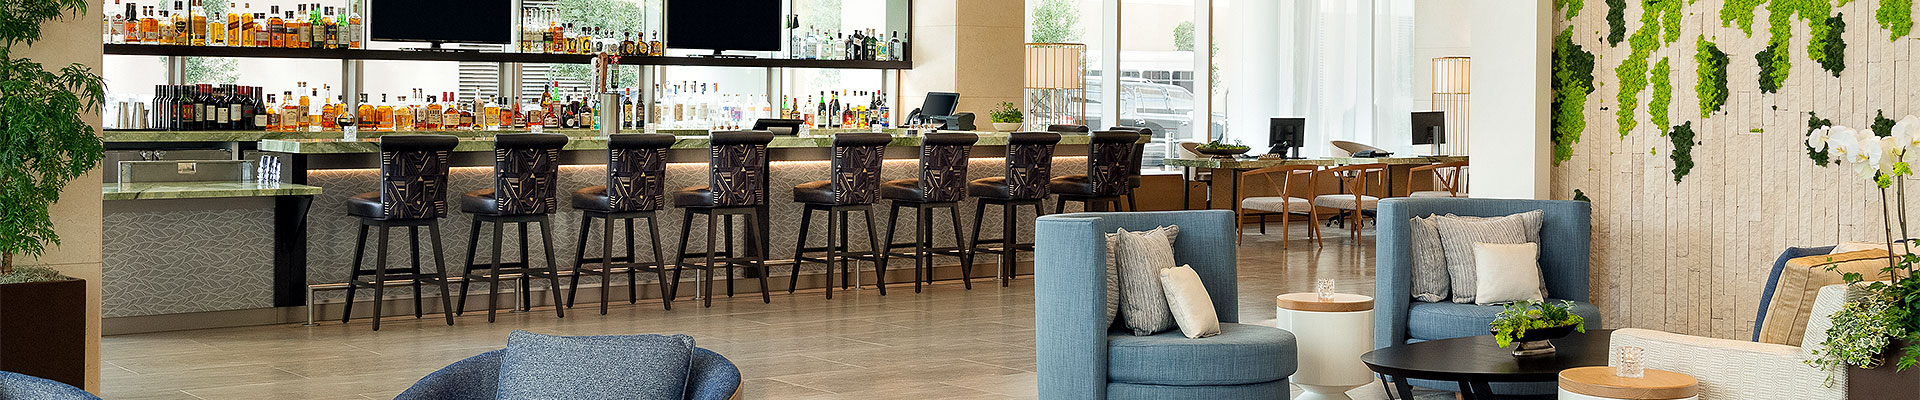 Seating area next to bar with stools